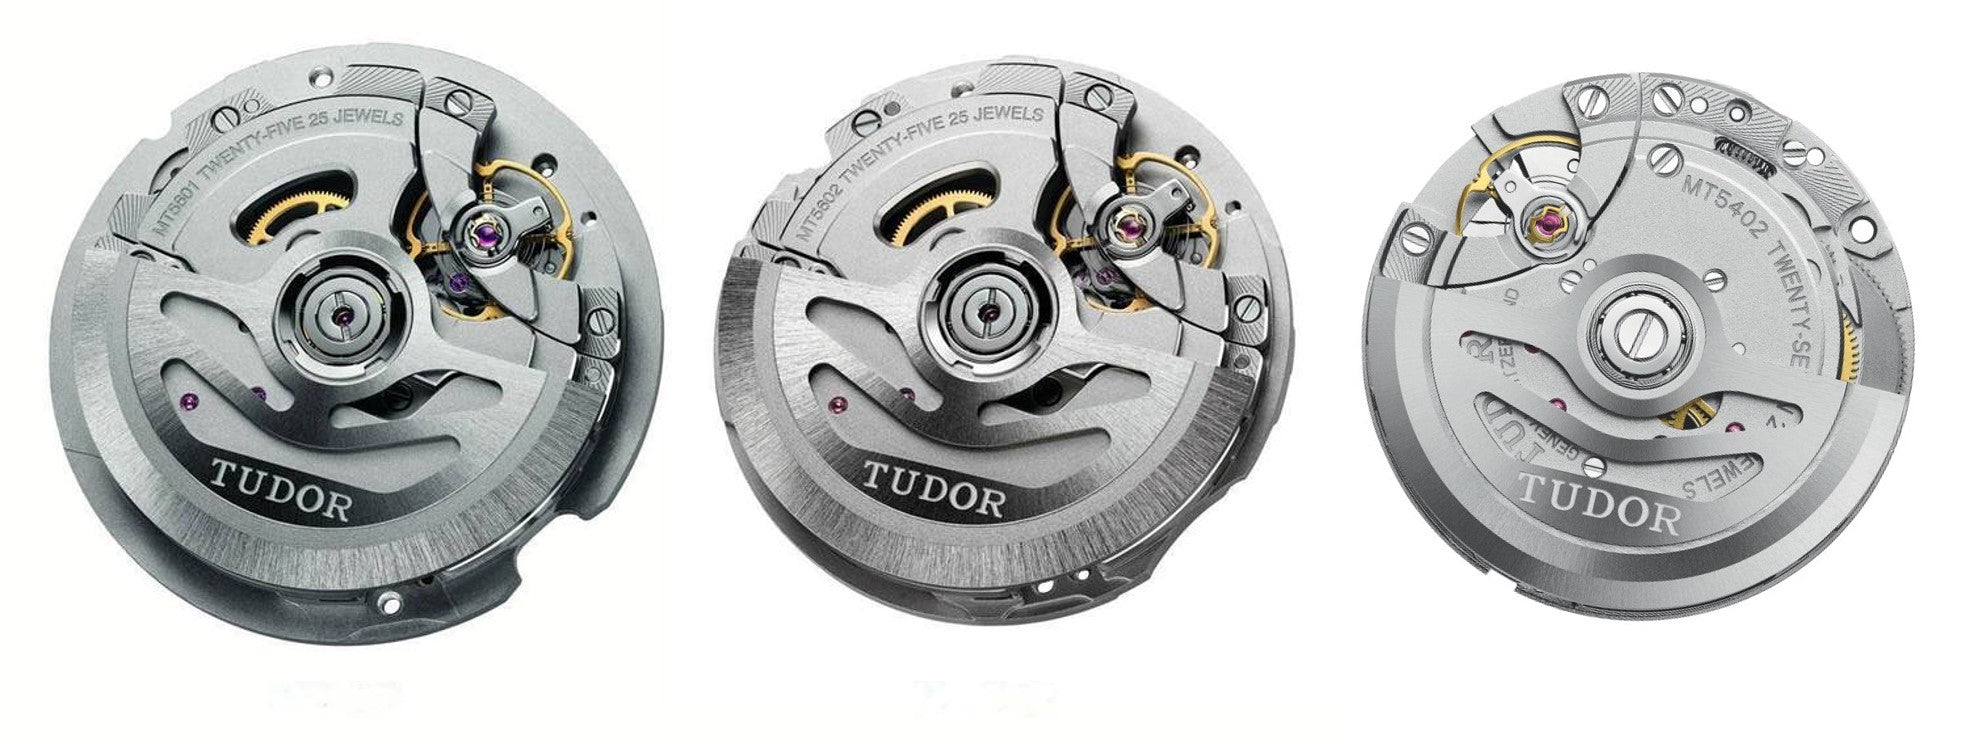 Tudor MT calibers side by side. Various sizes